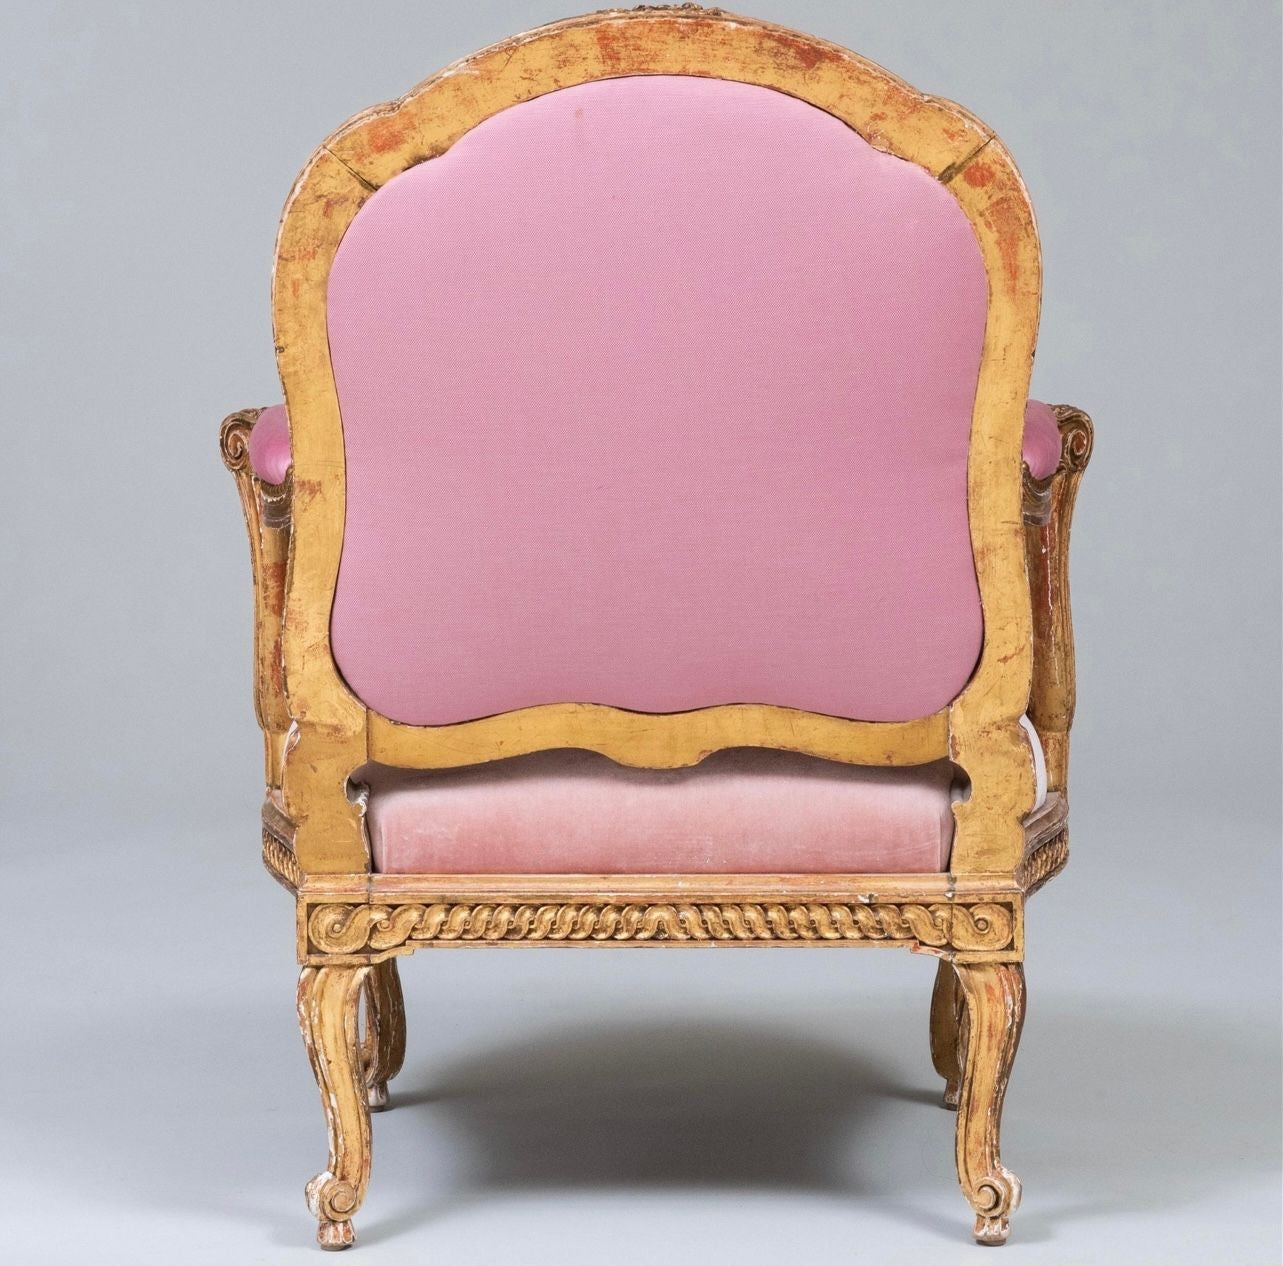 A Louis XV Style Carved Giltwood Armchair, 19C